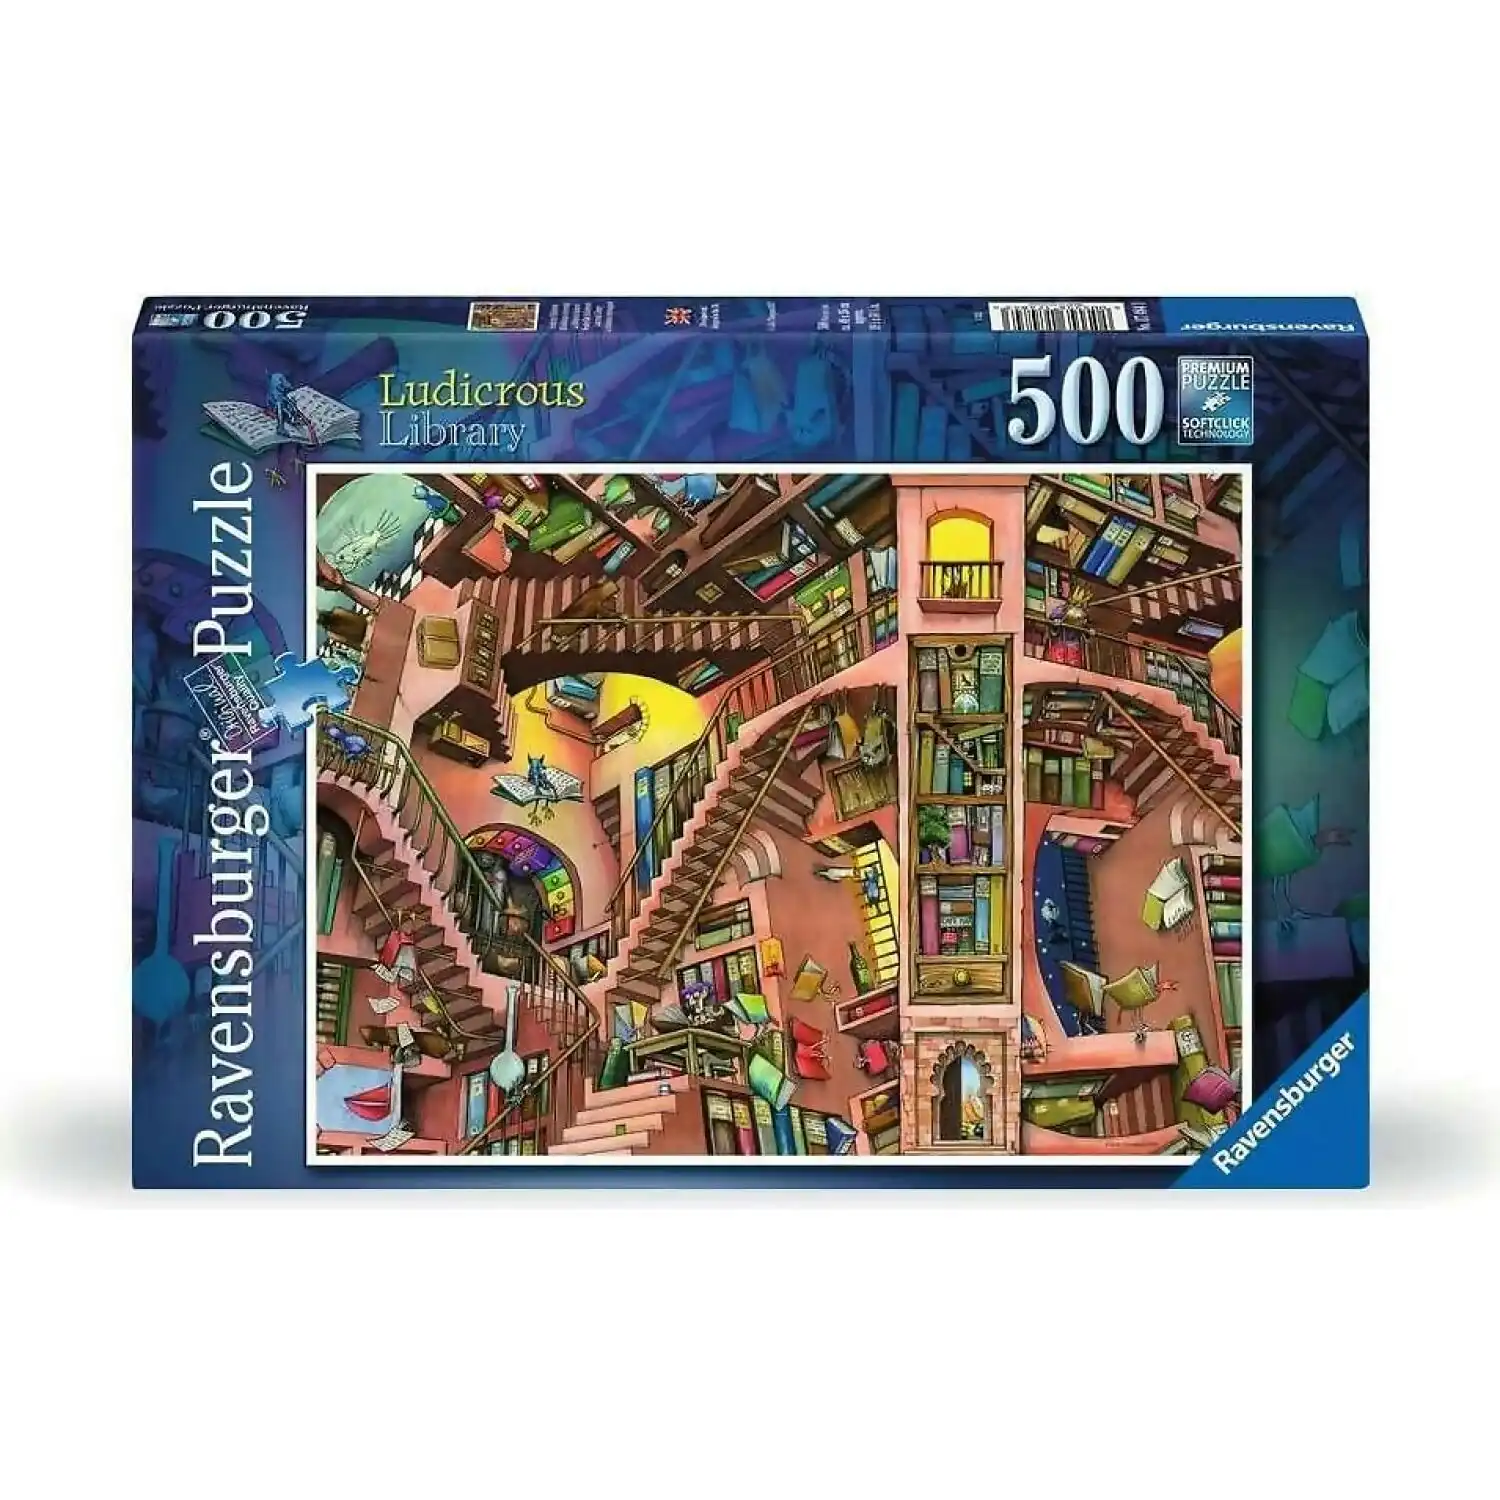 Ravensburger - Ludicrous Library Jigsaw Puzzle 500pc